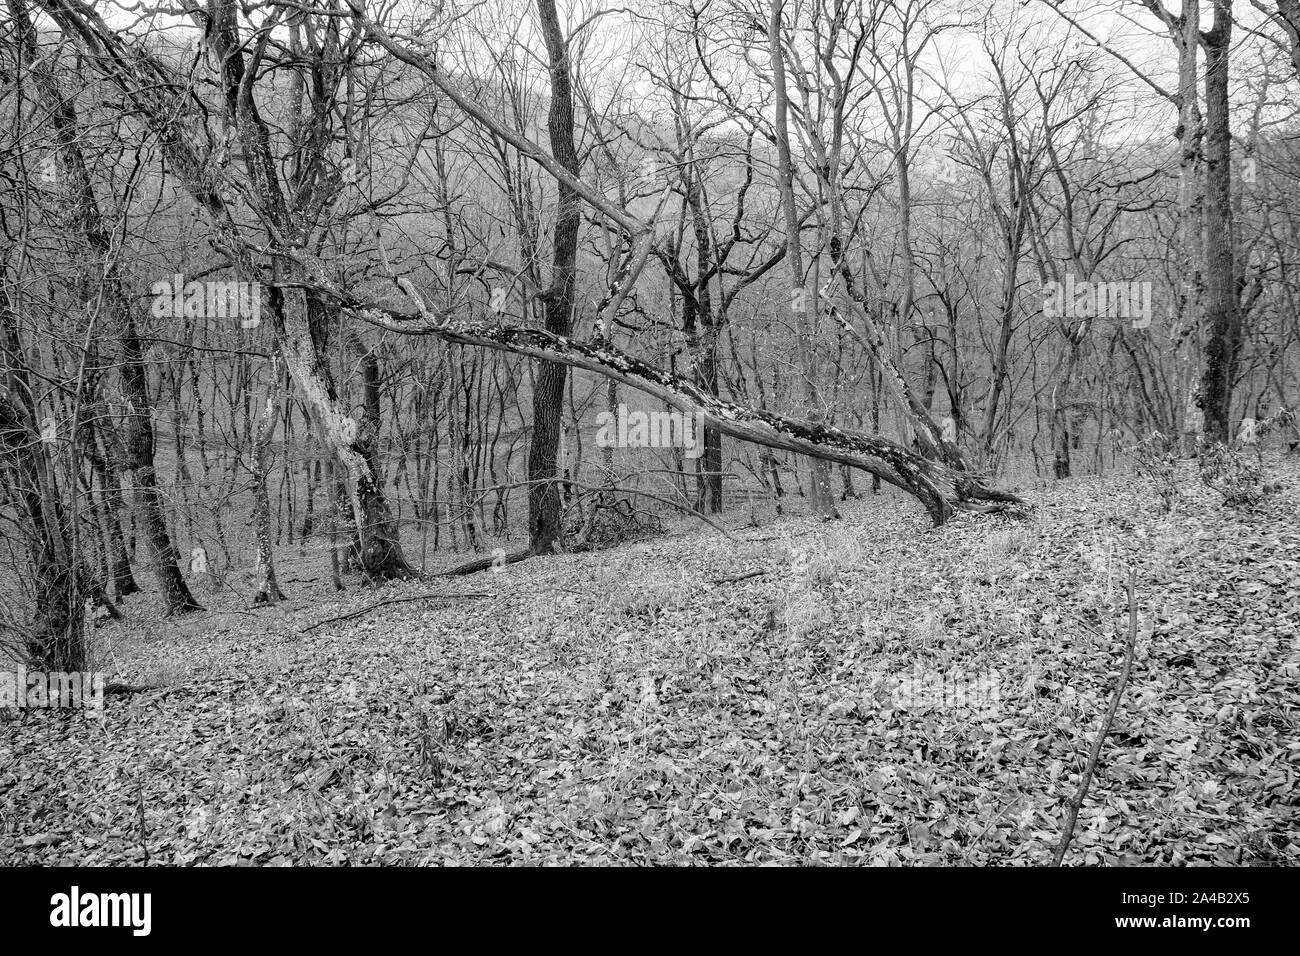 Hoia Baciu Forest. The World Most Haunted Forest with a reputation for many intense paranormal activity. Stock Photo